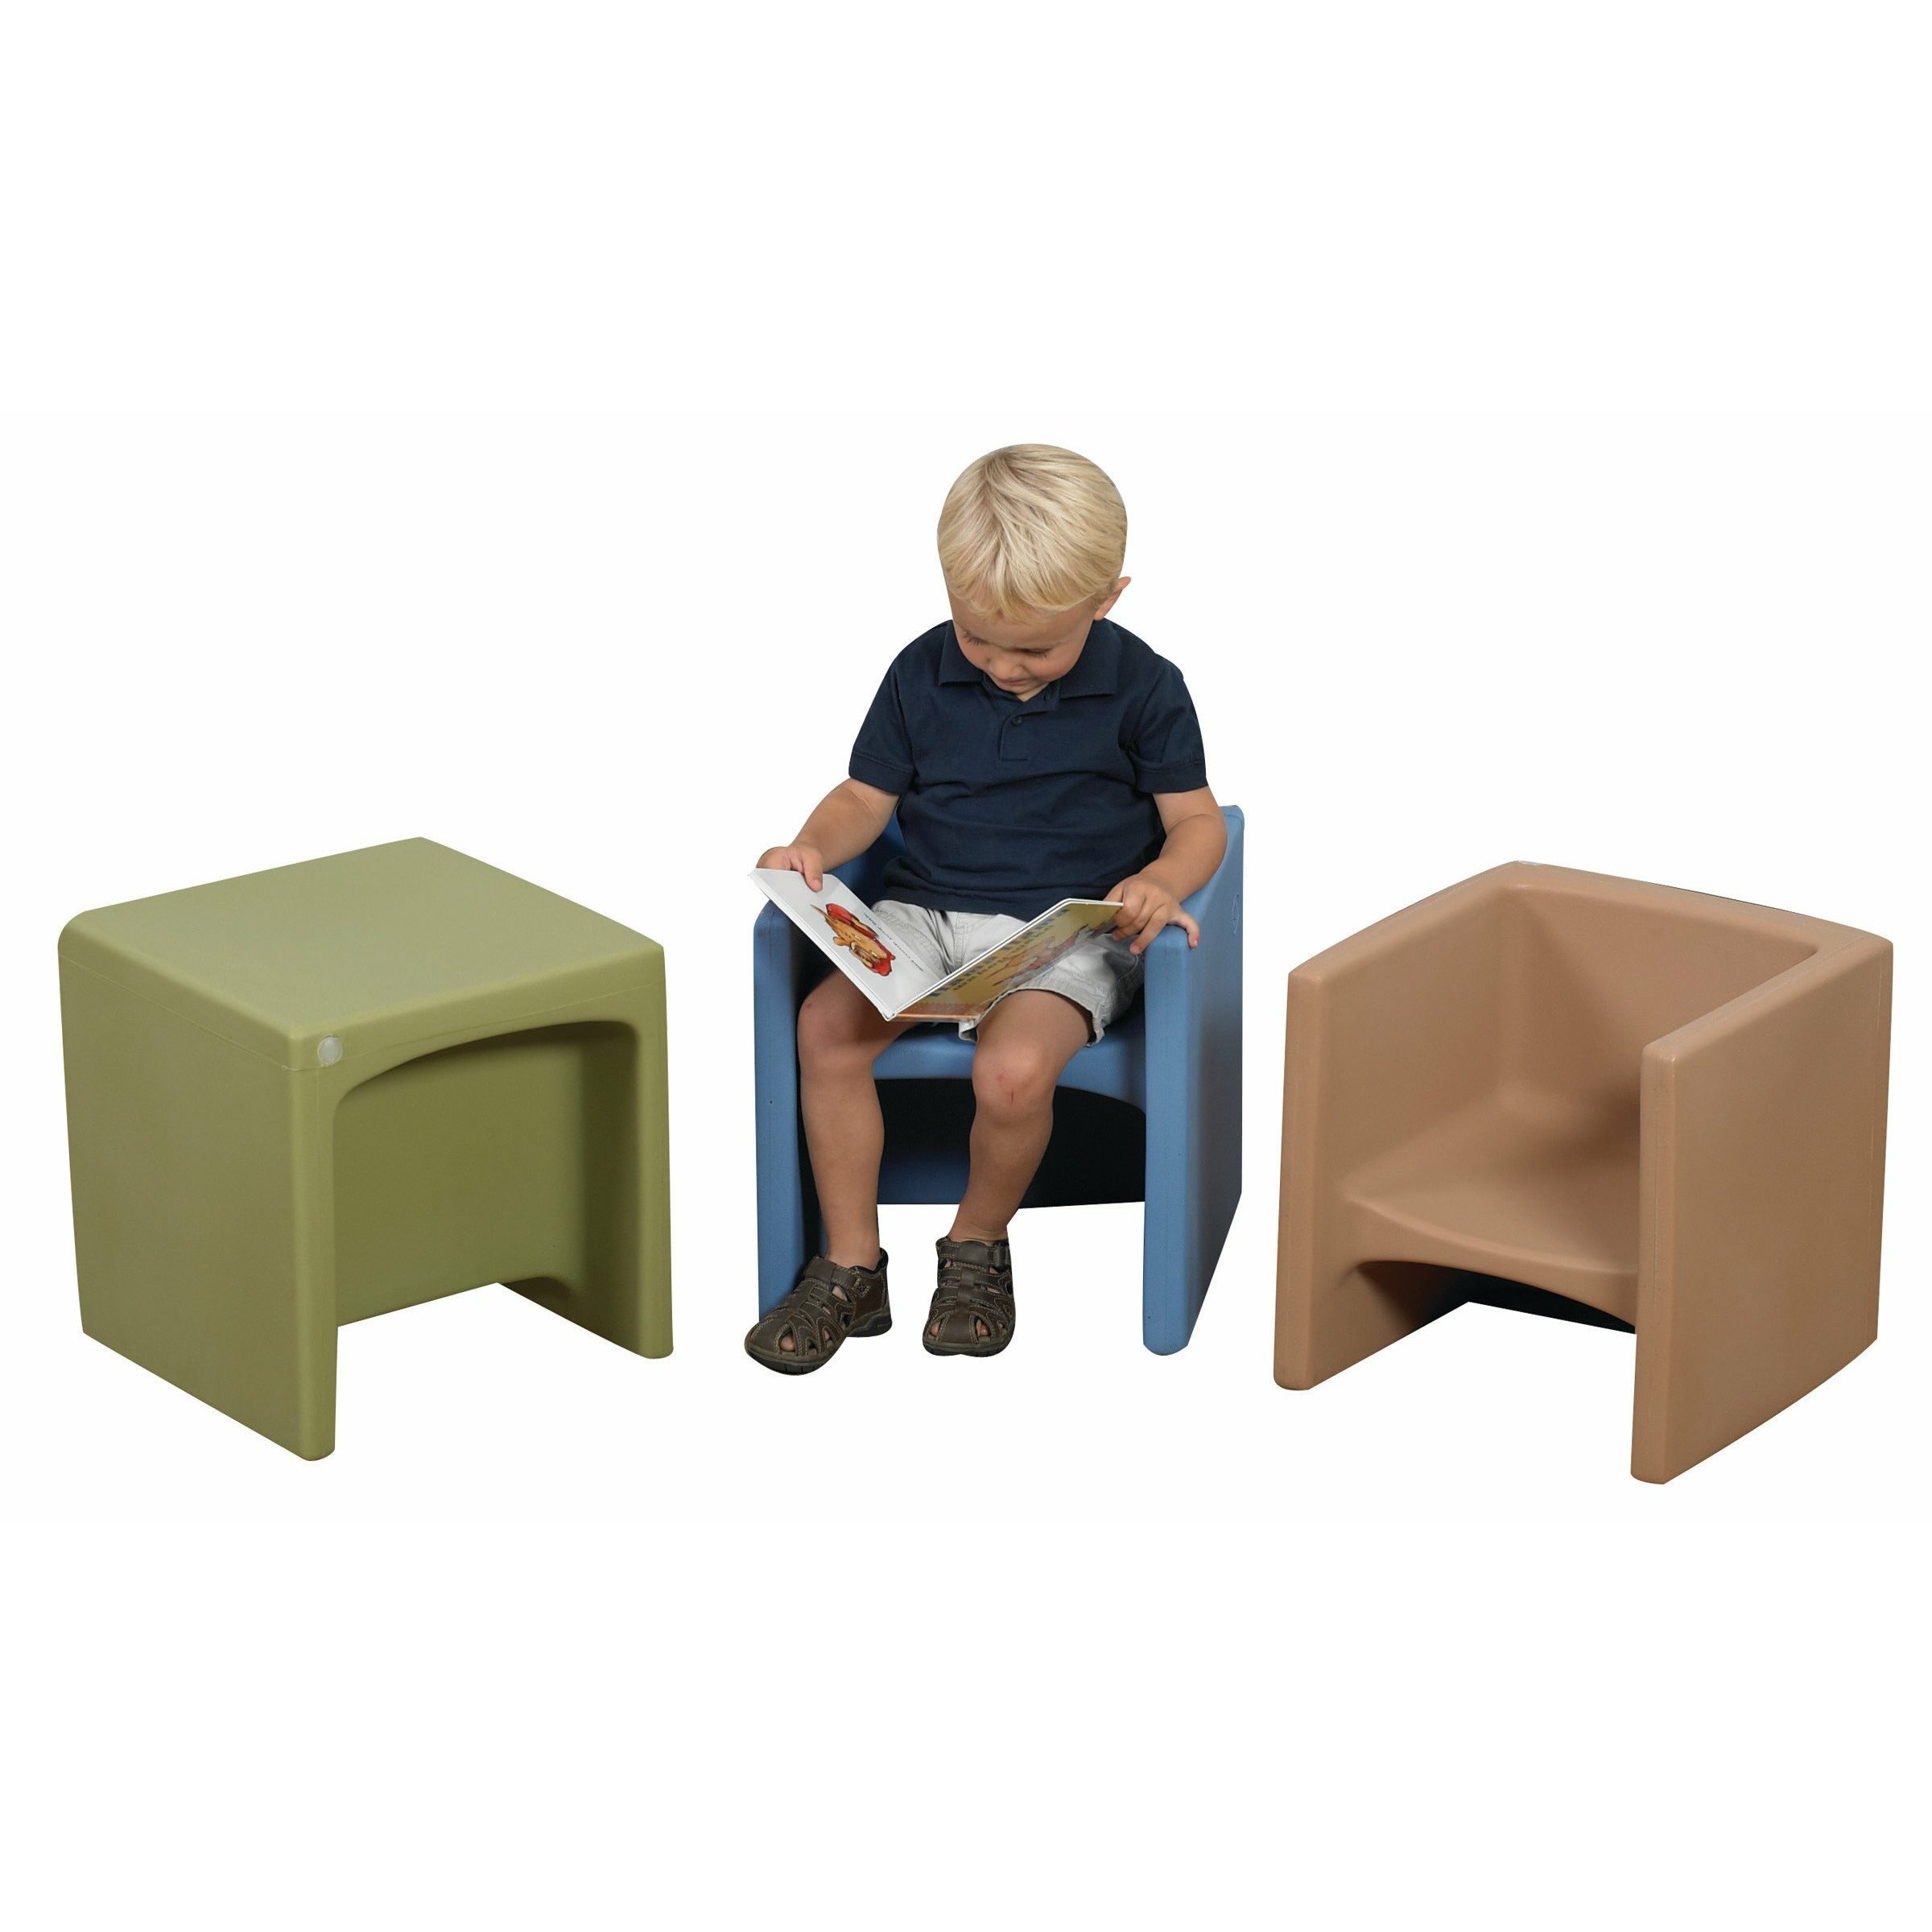 Chair Cube, Set of 3 Woodland Colors